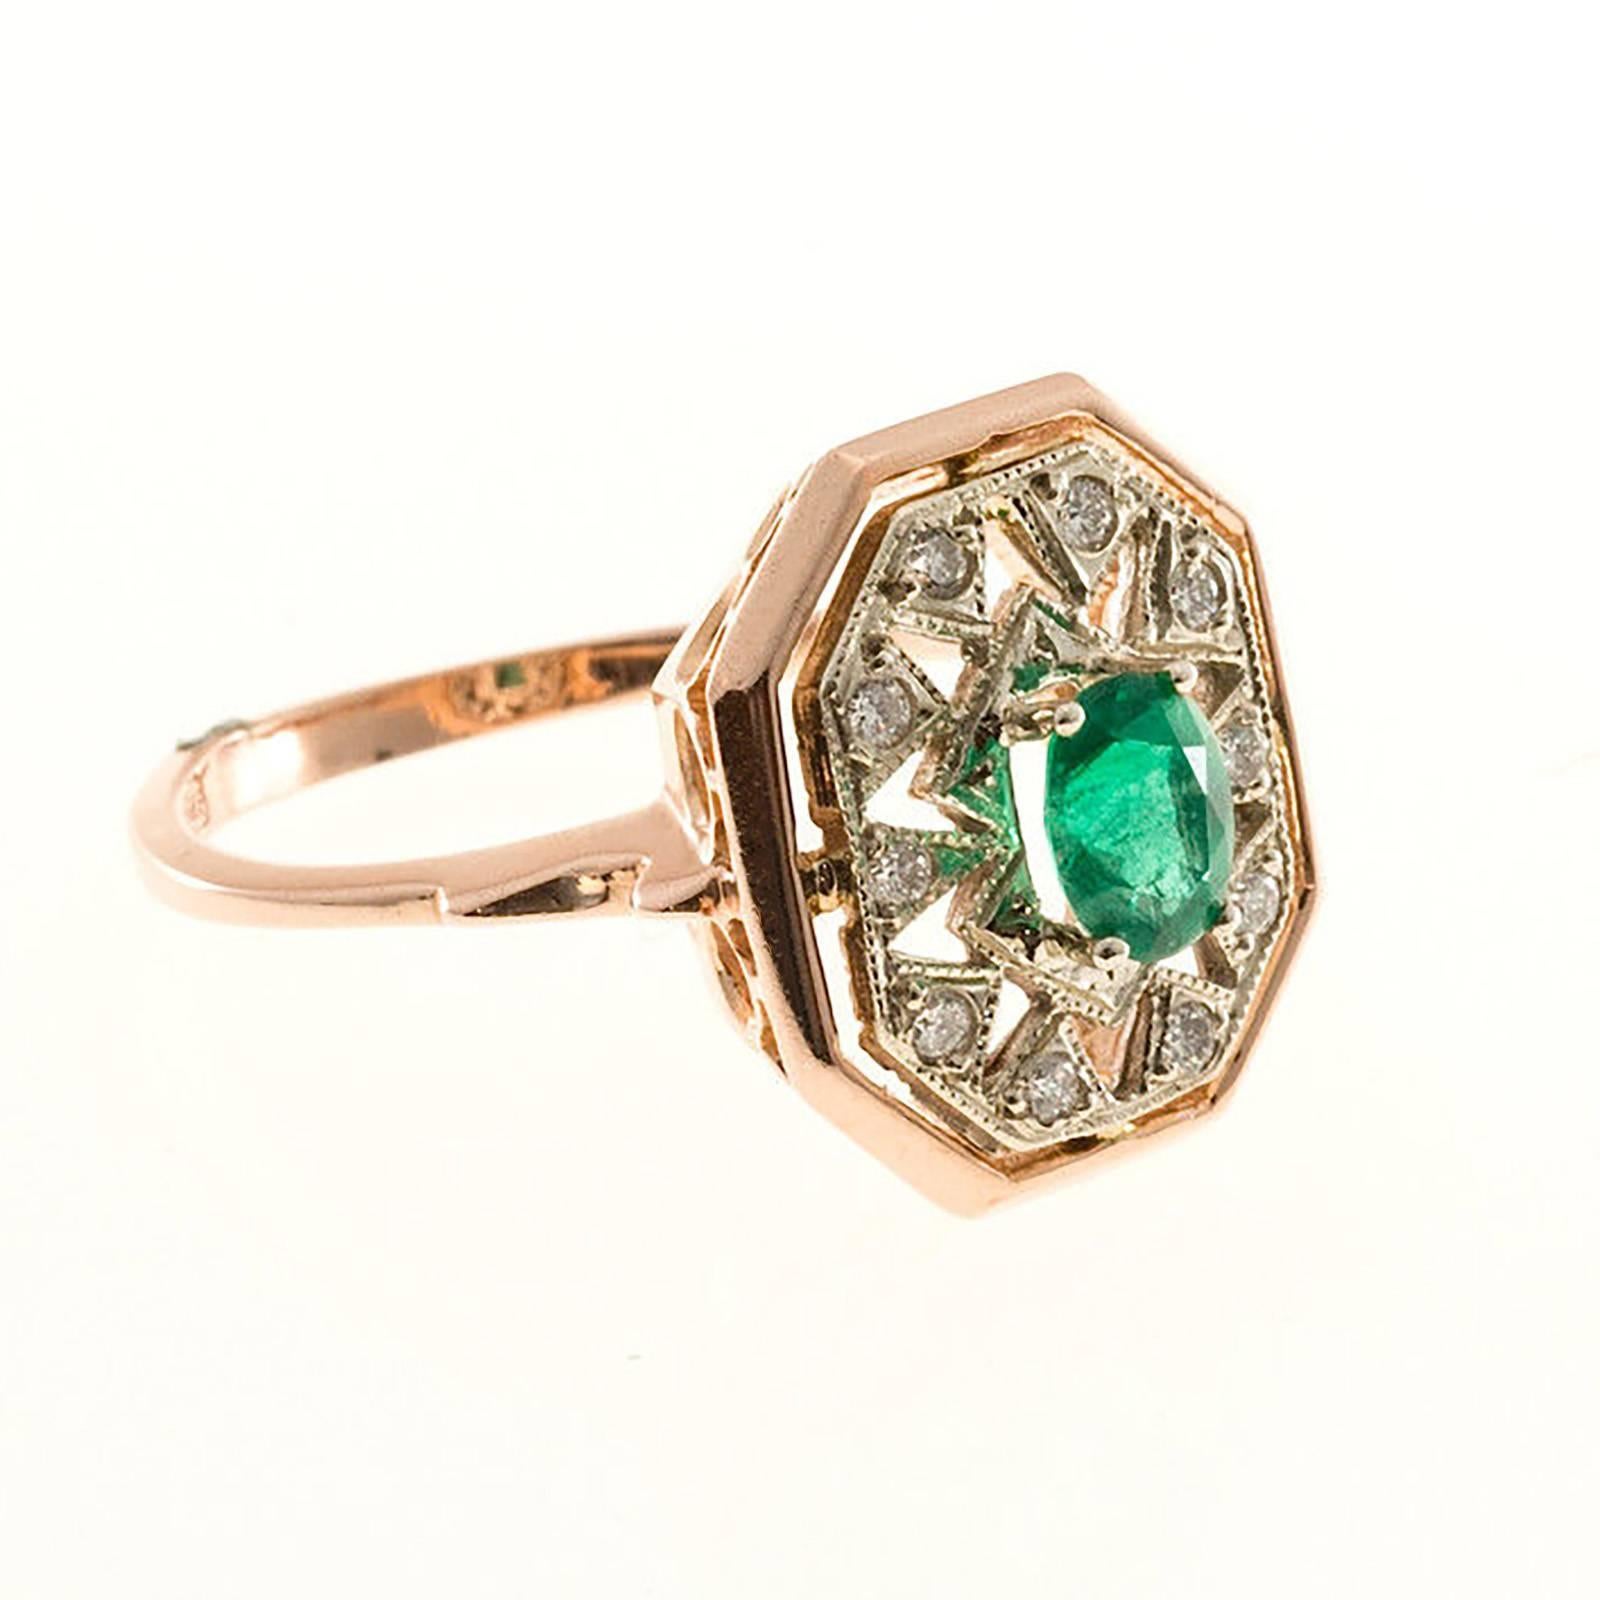 14k rose gold oval emerald and diamond open work ring. 

1 oval genuine fine Emerald, approx. total weight .50cts, 5.8 x 4.6mm
10 round full cut diamonds, approx. total weight .20cts, G, VS
14k rose and white gold
Stamped: 585
4.6 grams
Width